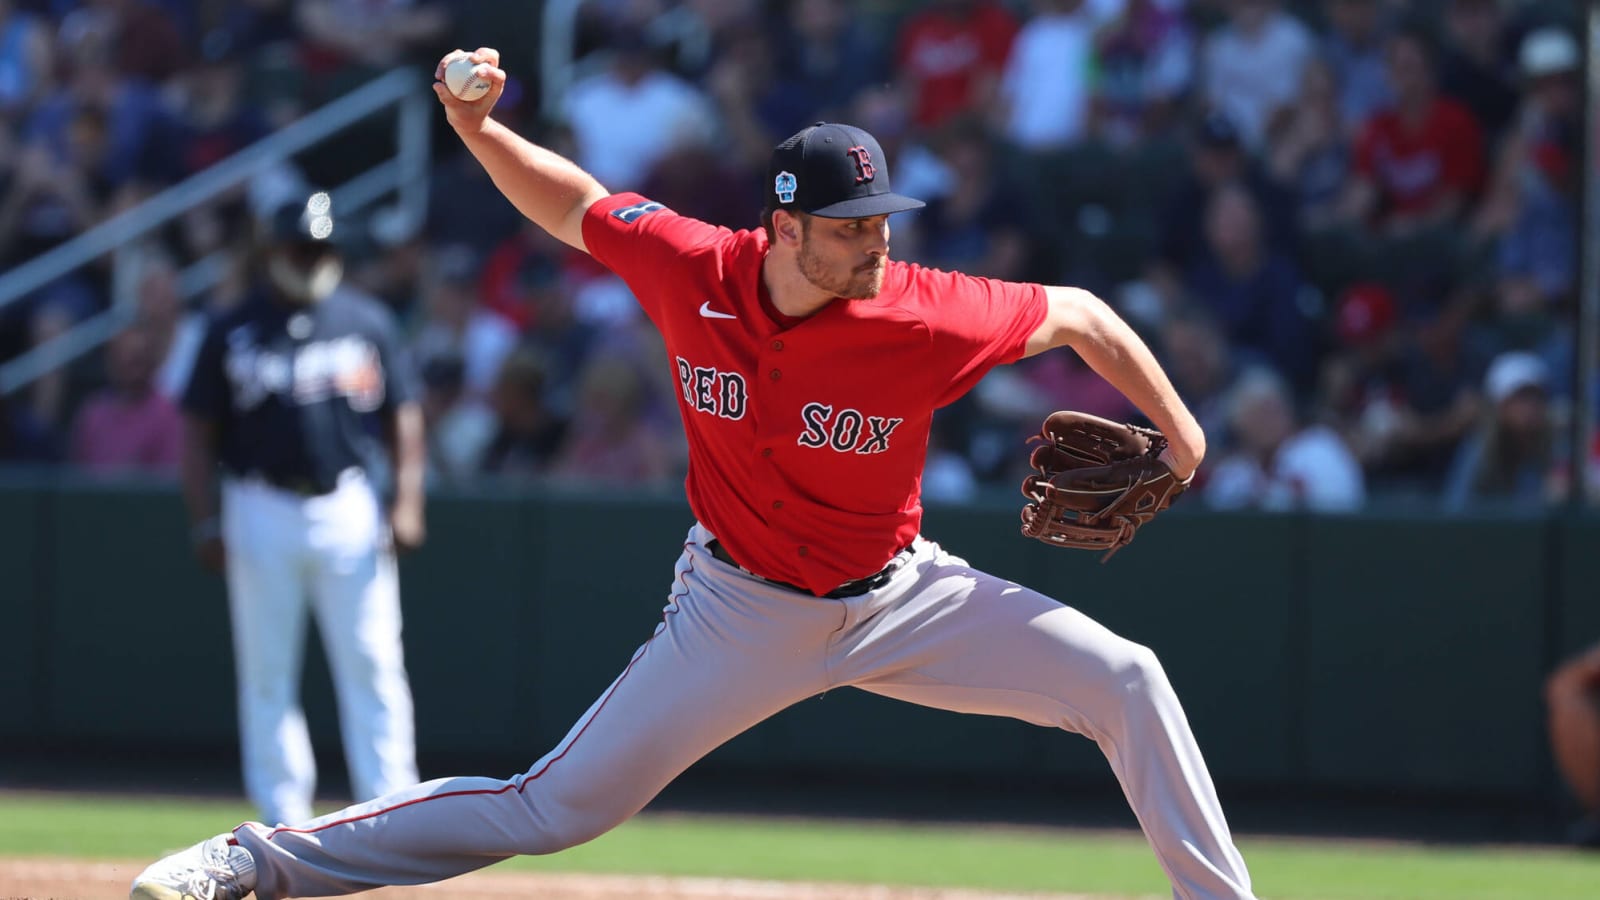 Red Sox reliever Wyatt Mills shut down with flexor issue, likely to start season on injured list